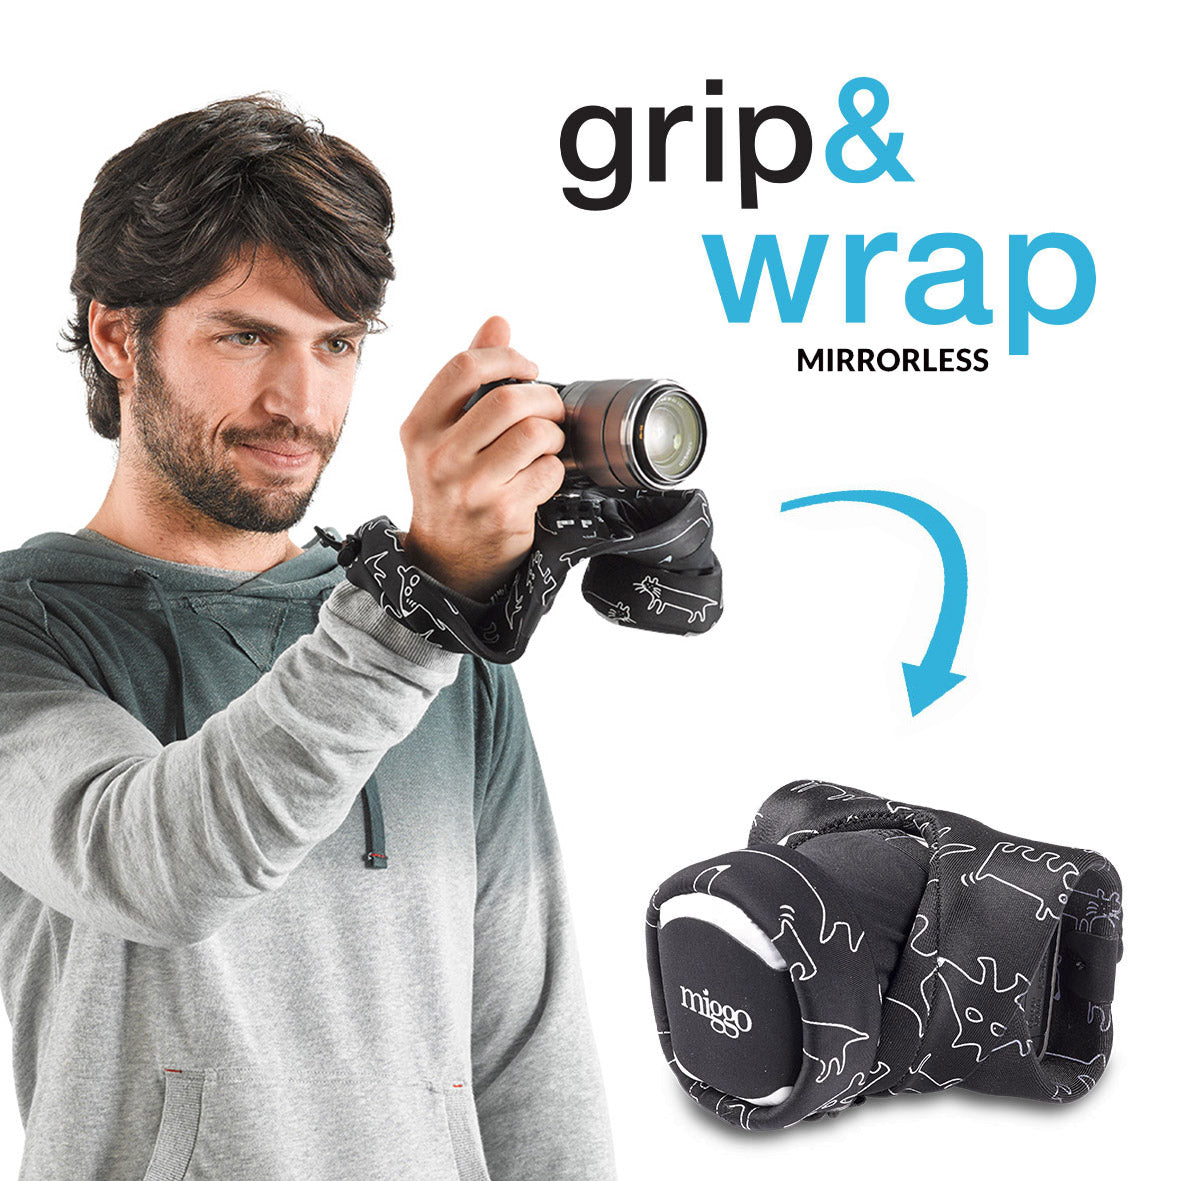 Serves as a camera grip (wrist strap) which morphs into a compact and padded camera carrier.